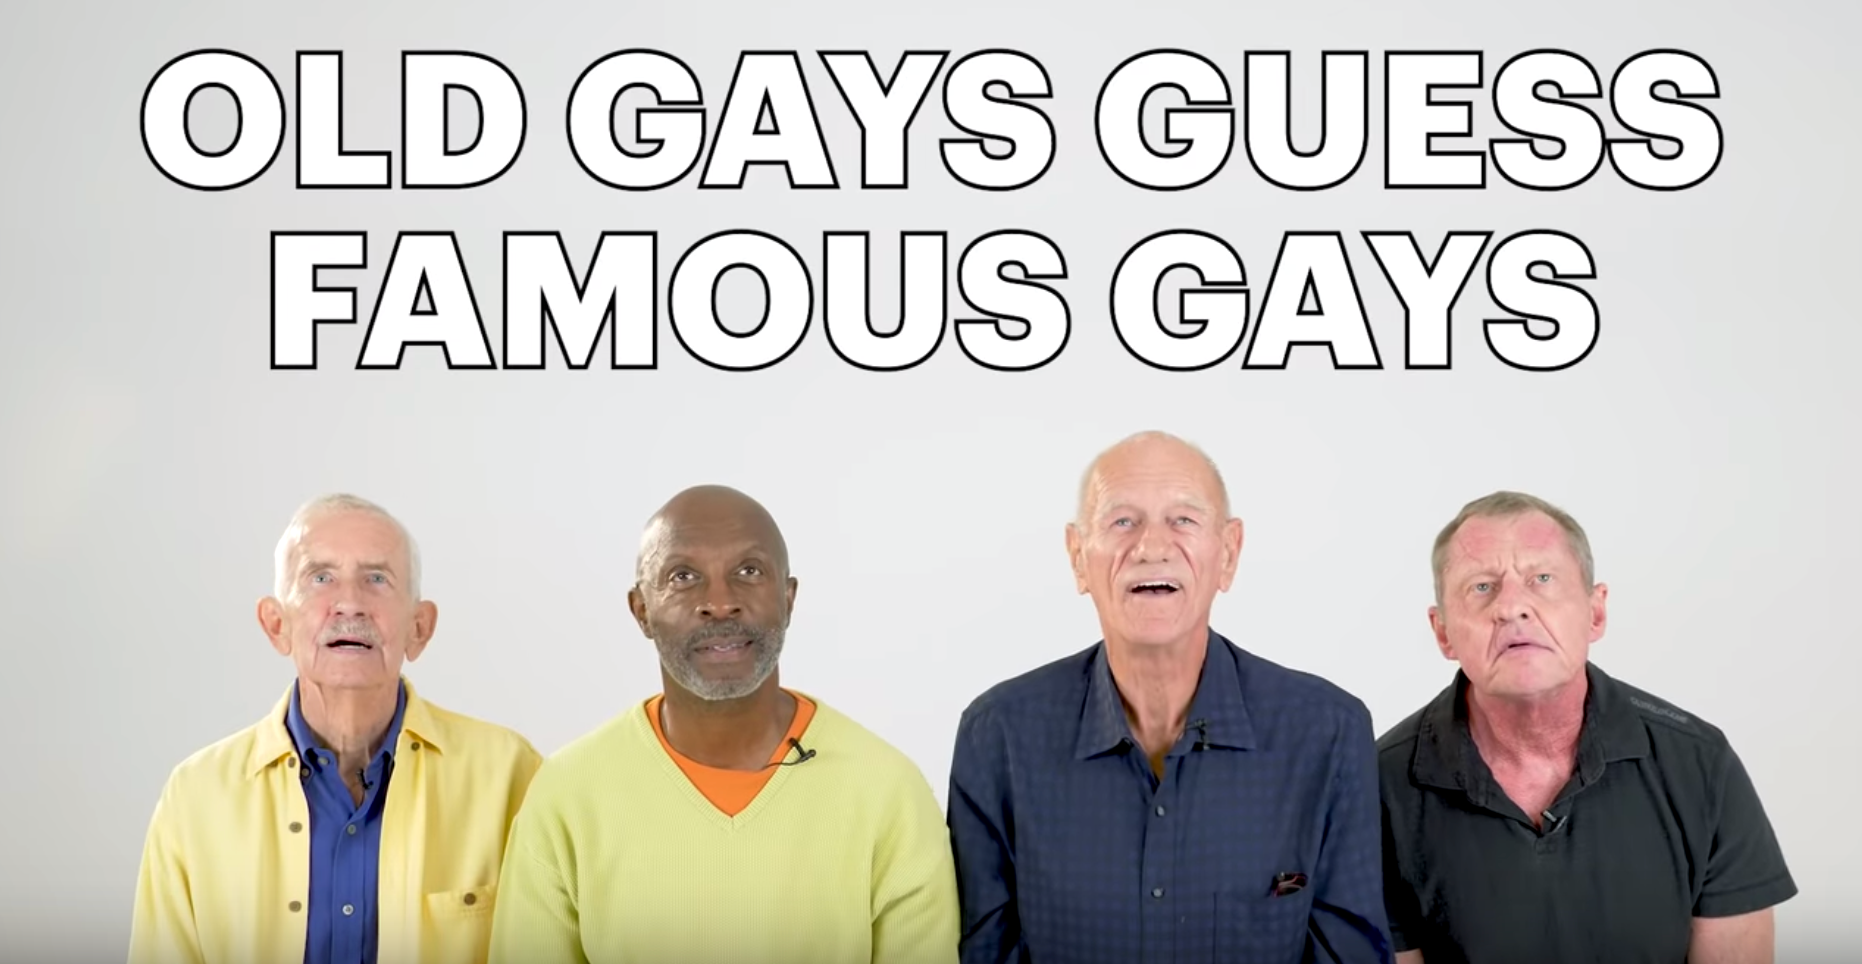 Try not to laugh watching these elderly gay men try to identify modern queer celebrities